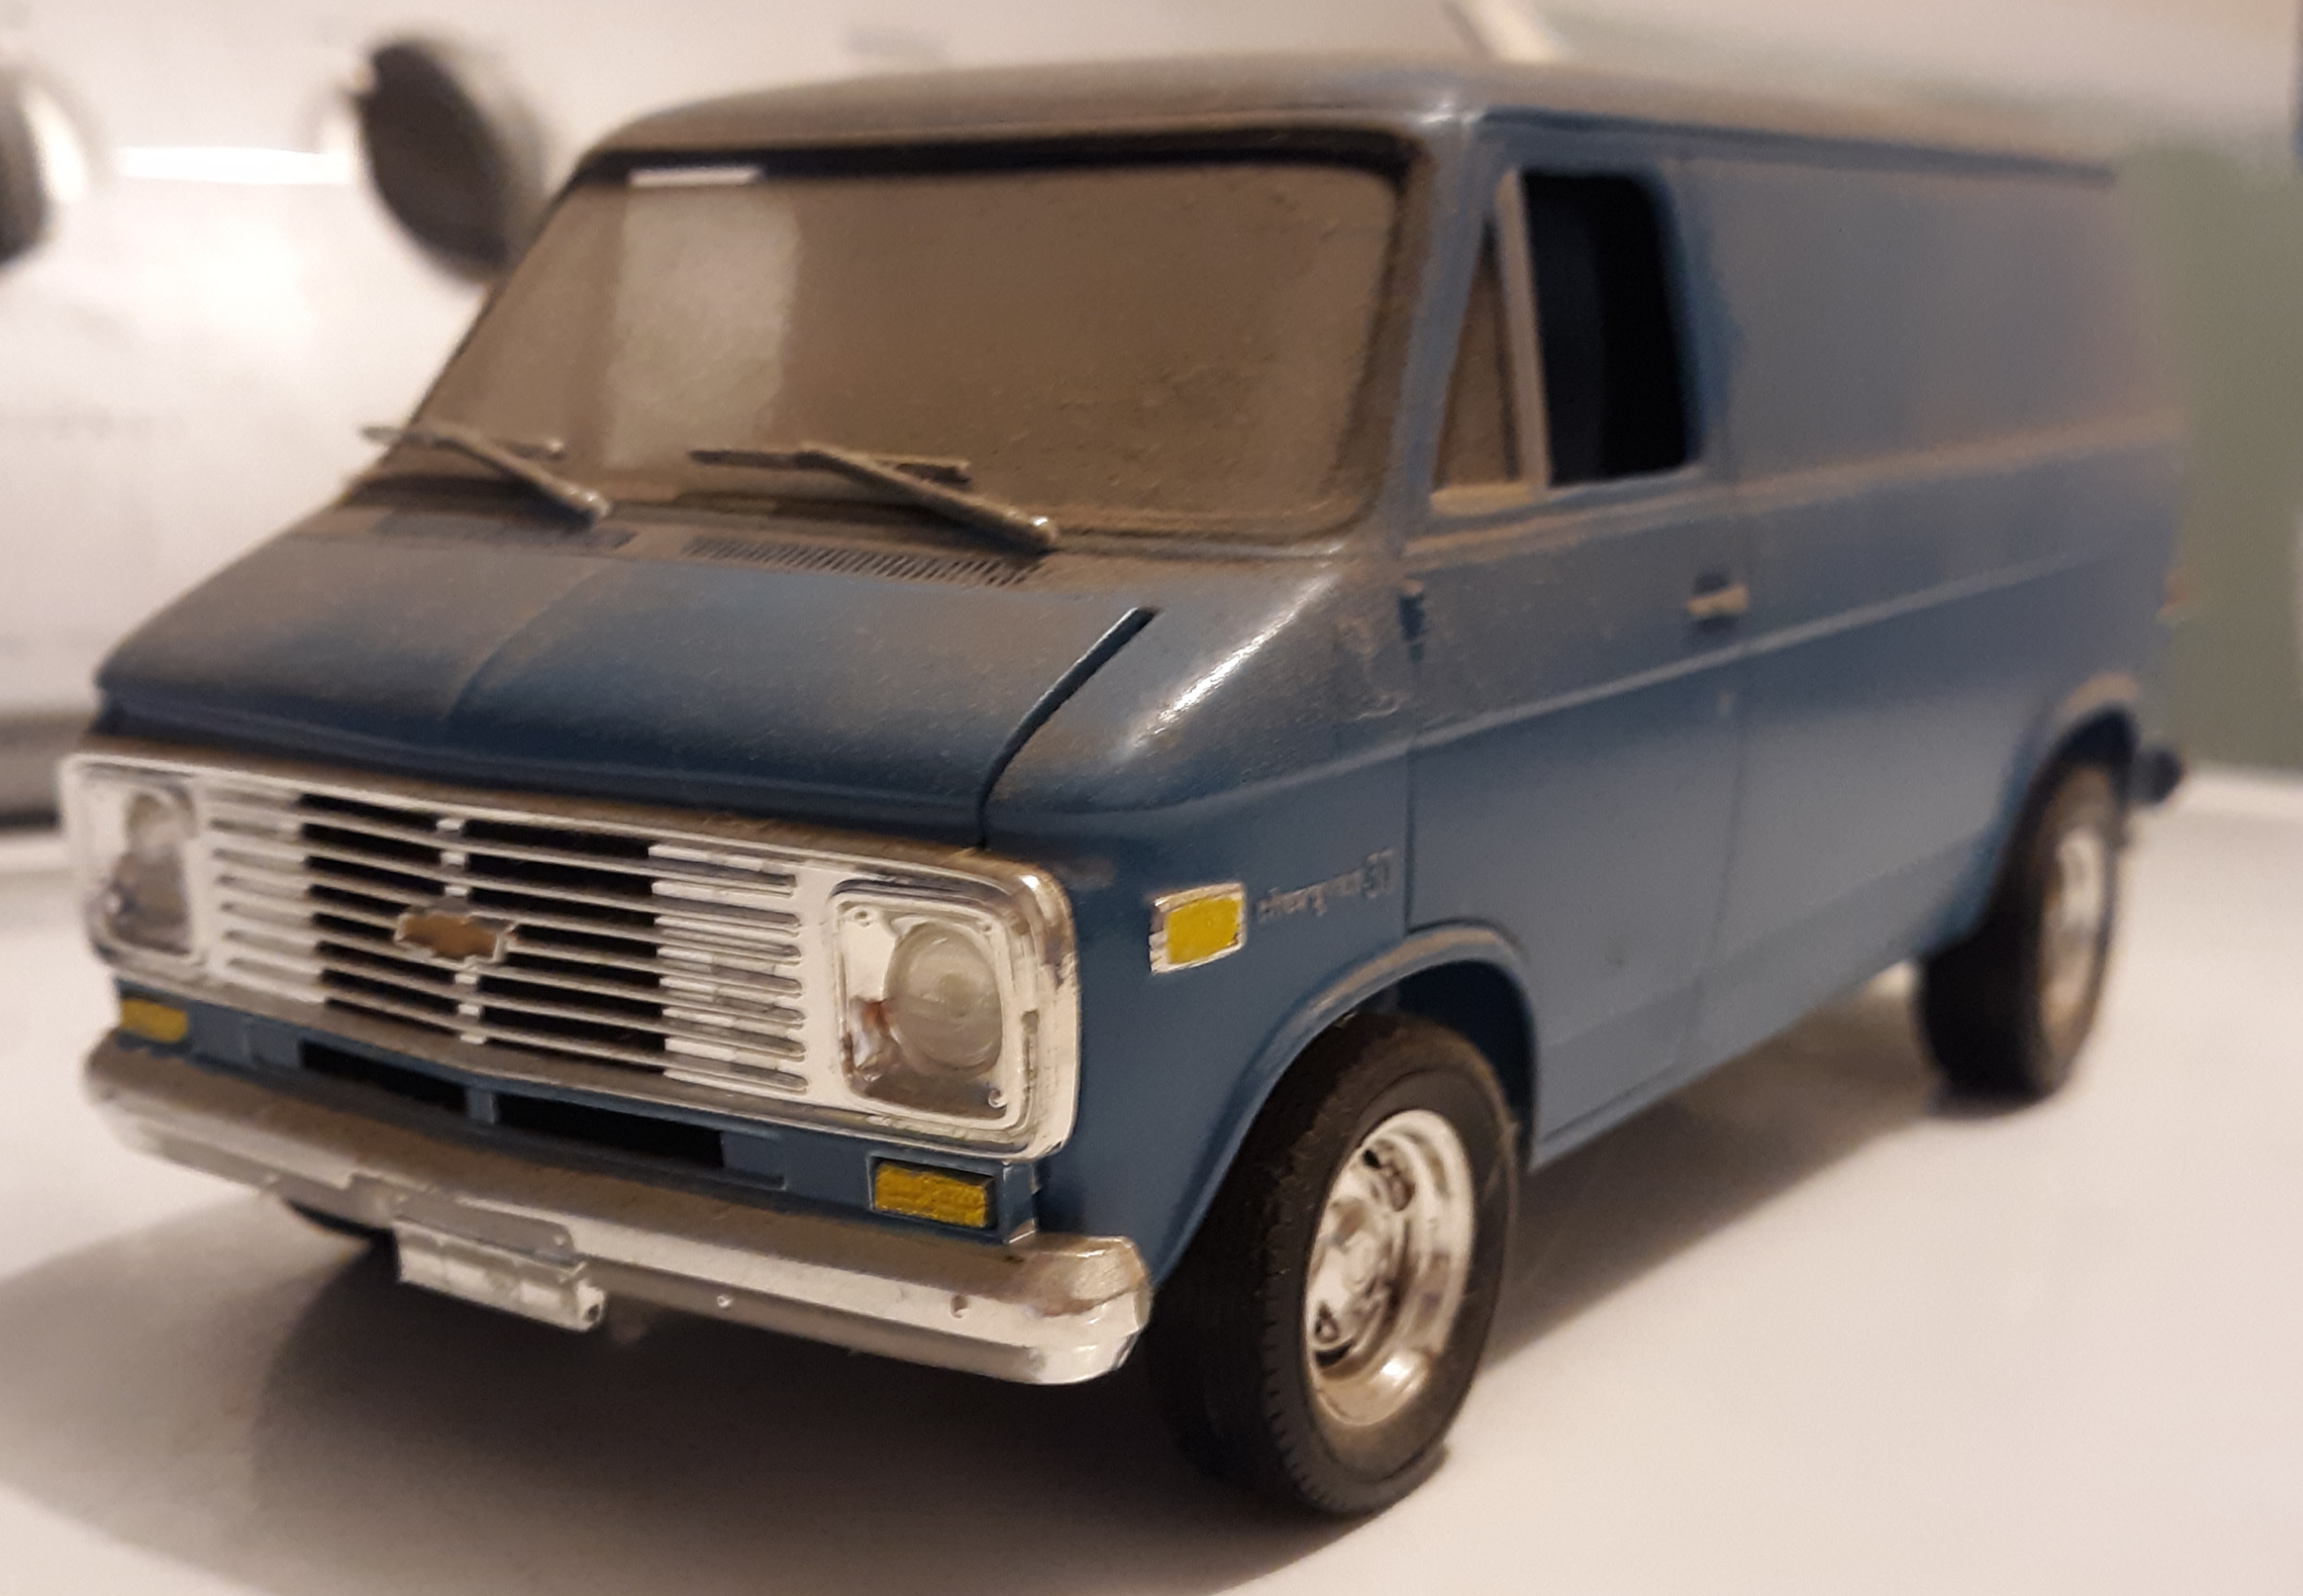 what is considered the best 70's american van kit. must be 1/25 scale -  Model Building Questions and Answers - Model Cars Magazine Forum